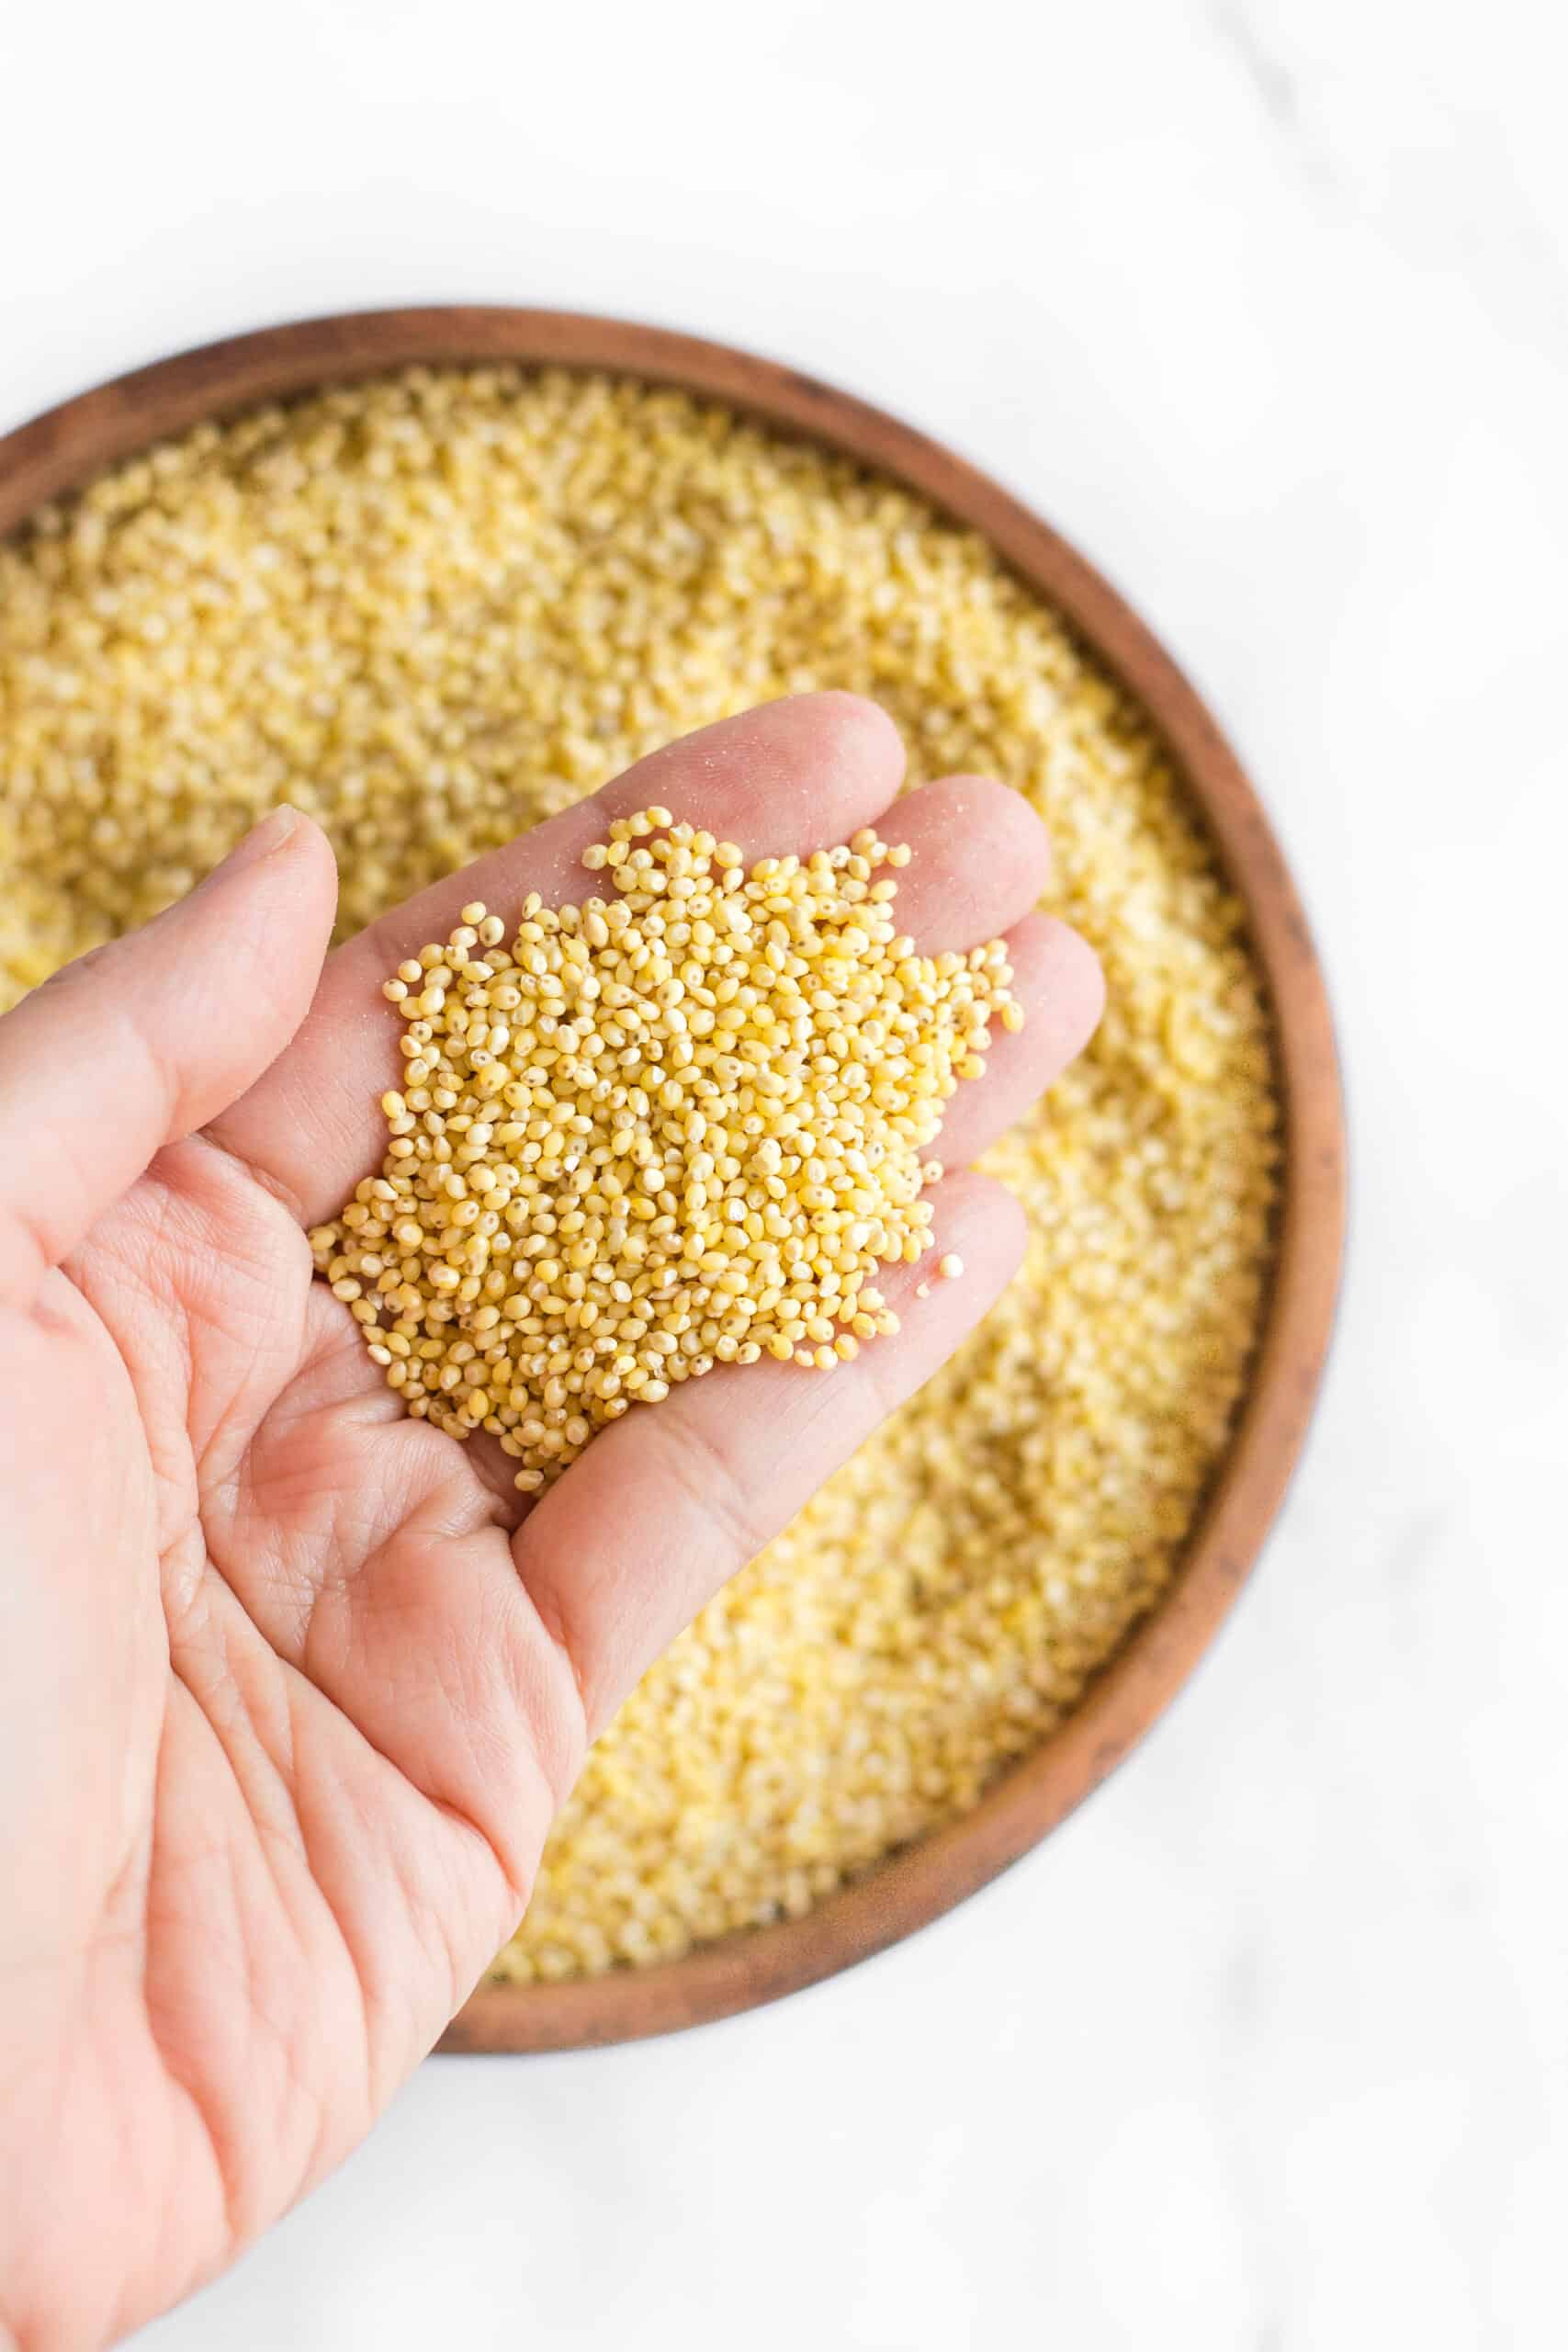 Holding up a handful of hulled millet seeds.